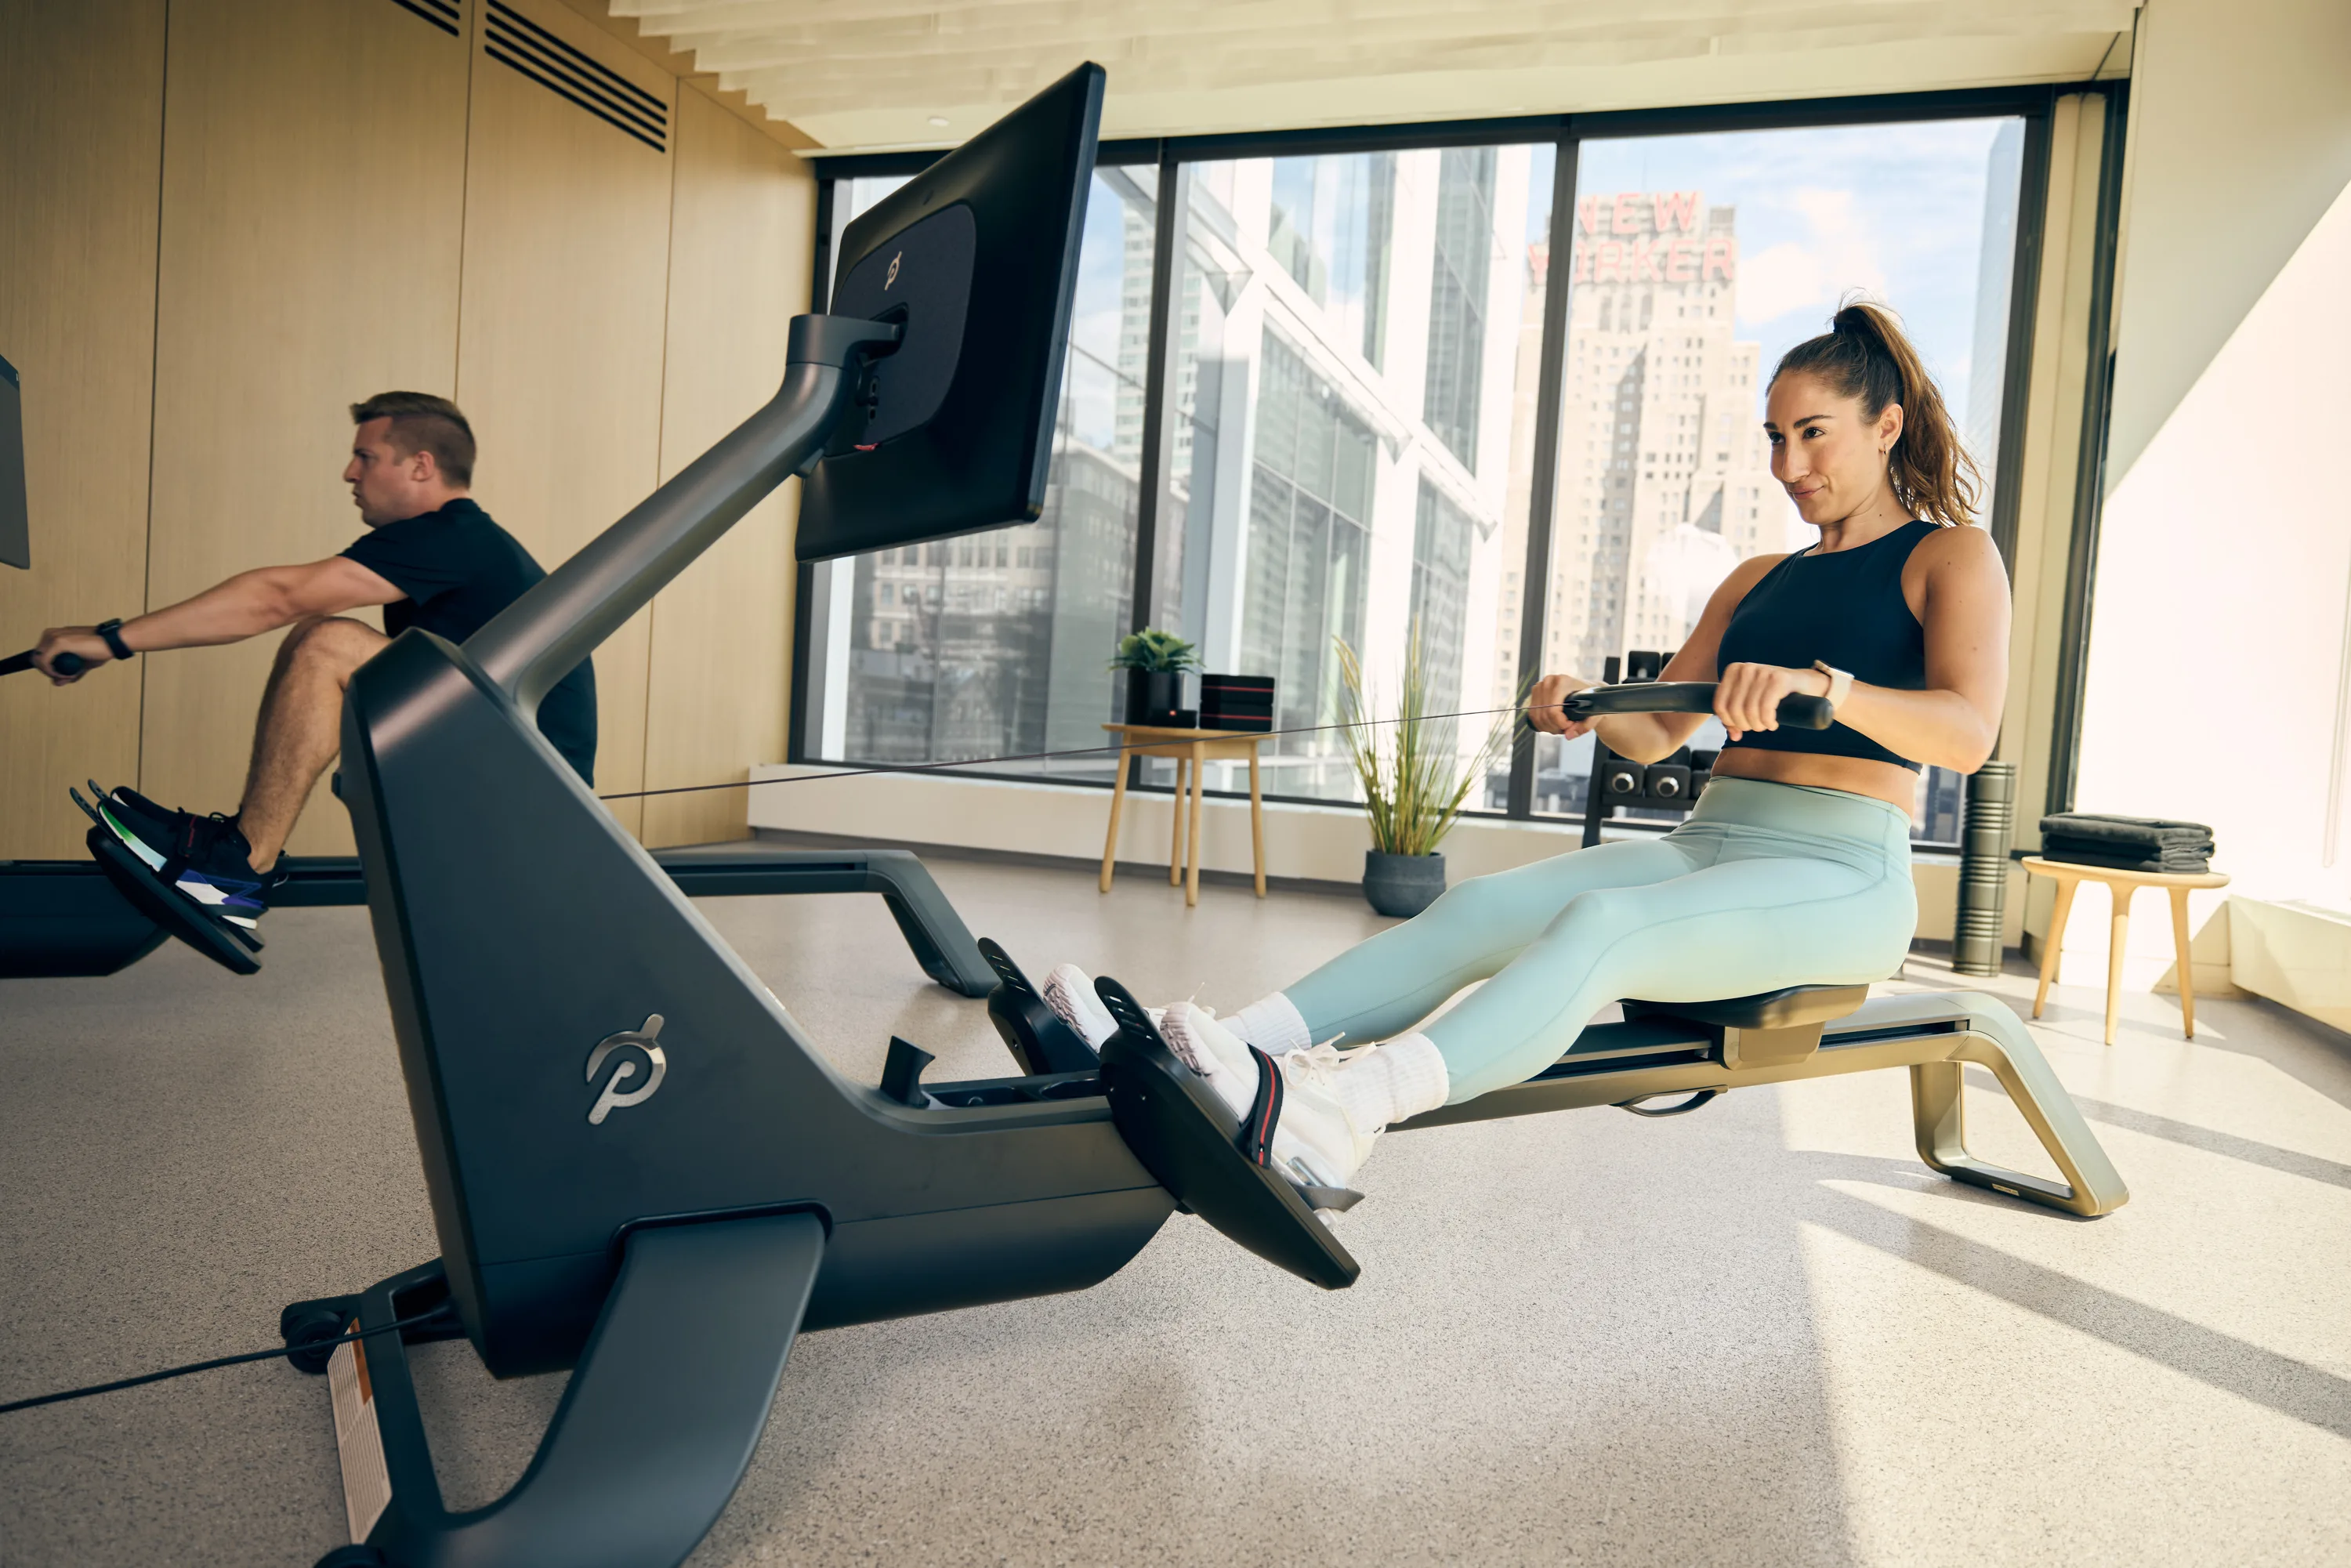 Peloton Members using the Peloton Row at a workplace gym